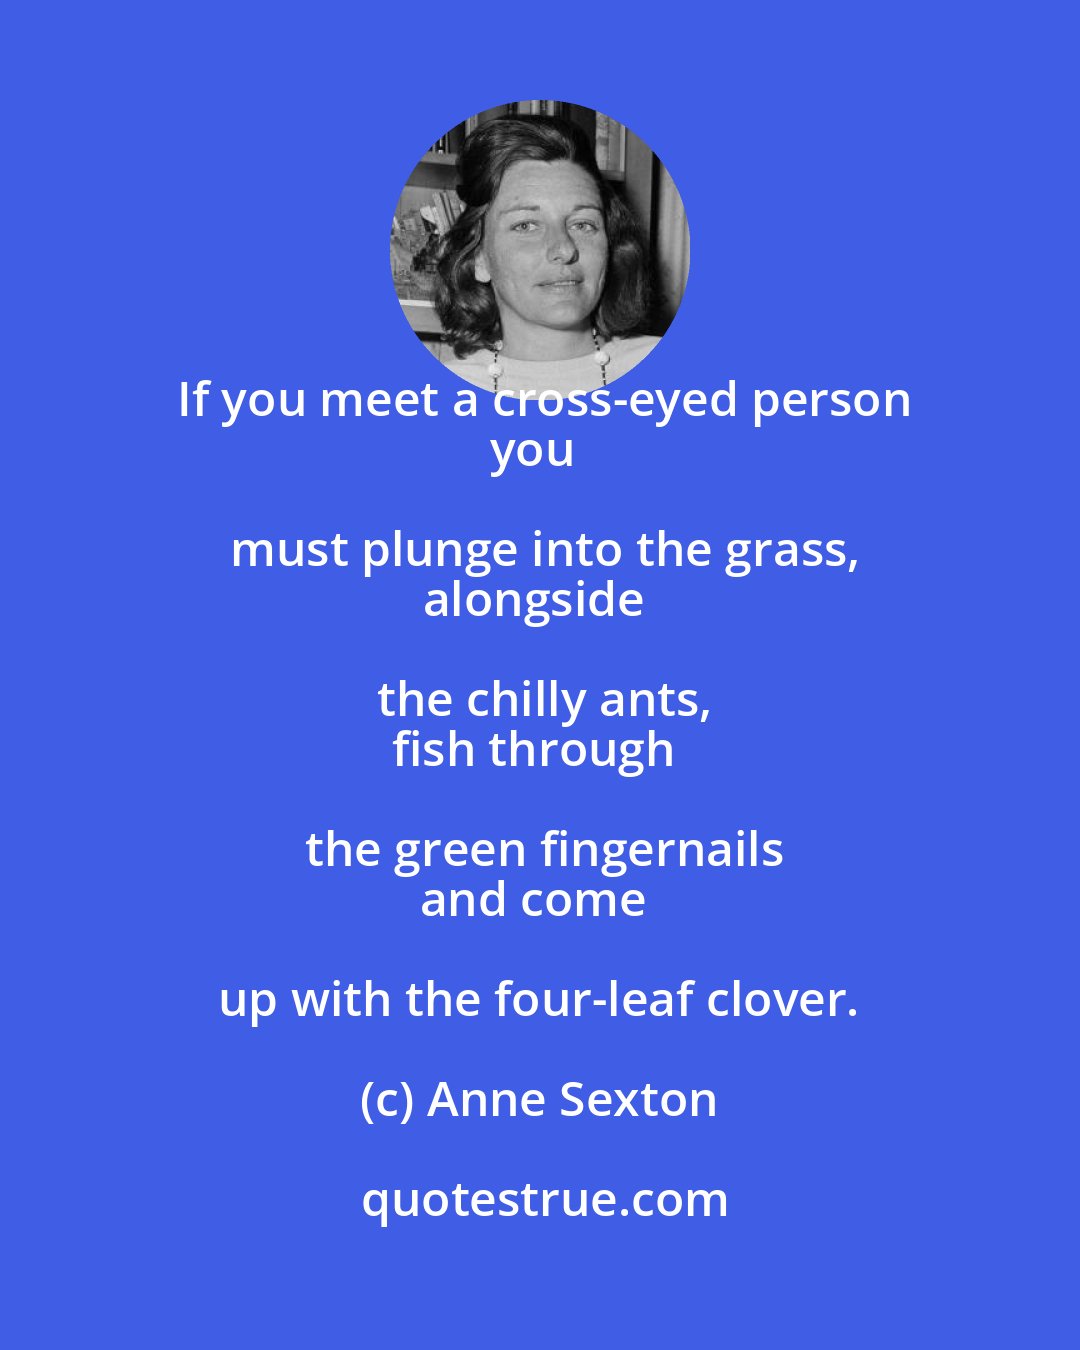 Anne Sexton: If you meet a cross-eyed person
you must plunge into the grass,
alongside the chilly ants,
fish through the green fingernails
and come up with the four-leaf clover.